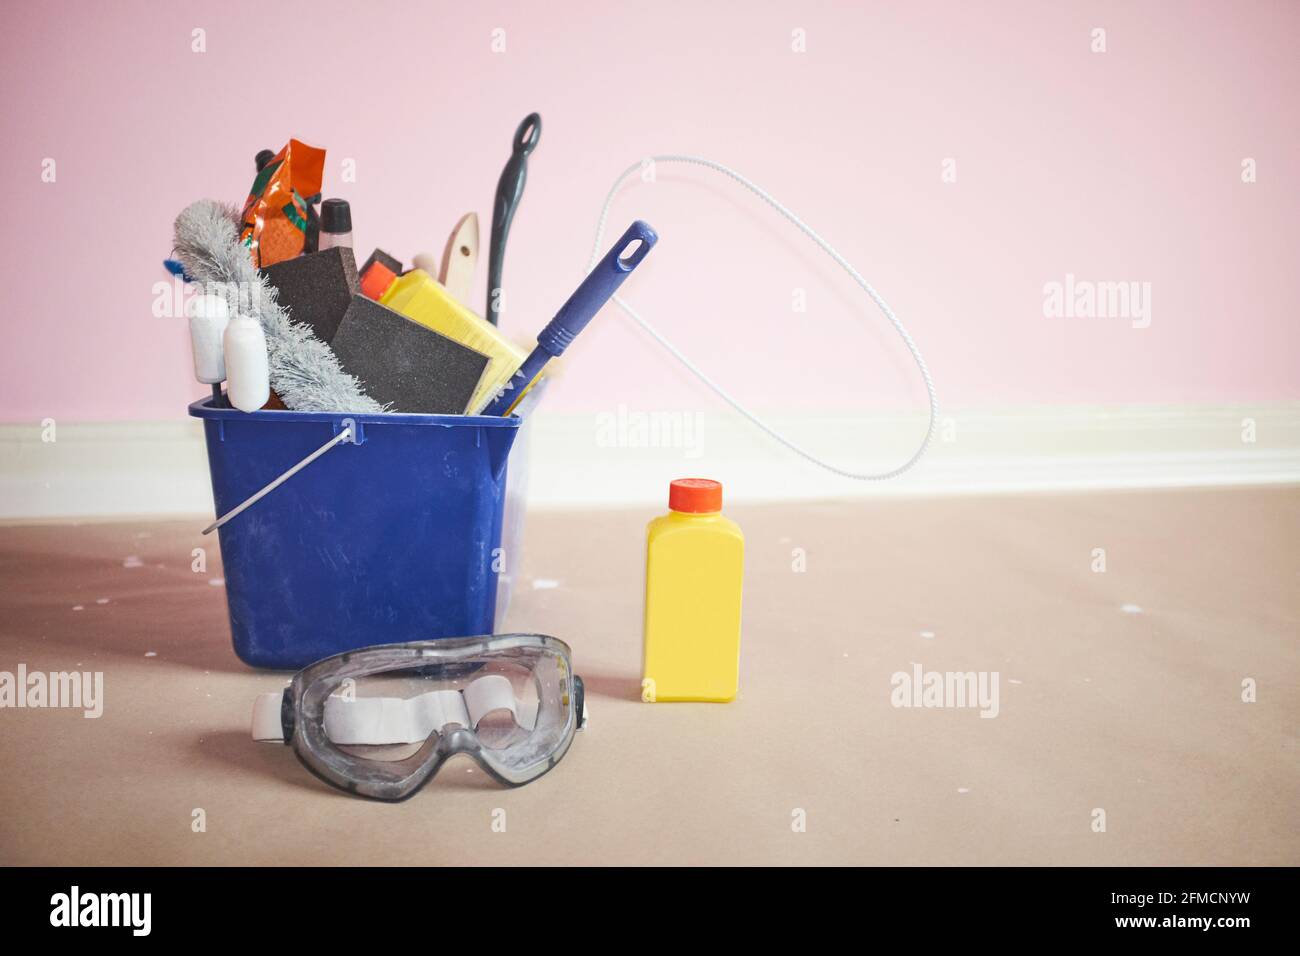 Blue bucket full of cleaning and redecoration tools and substances with goggles Stock Photo